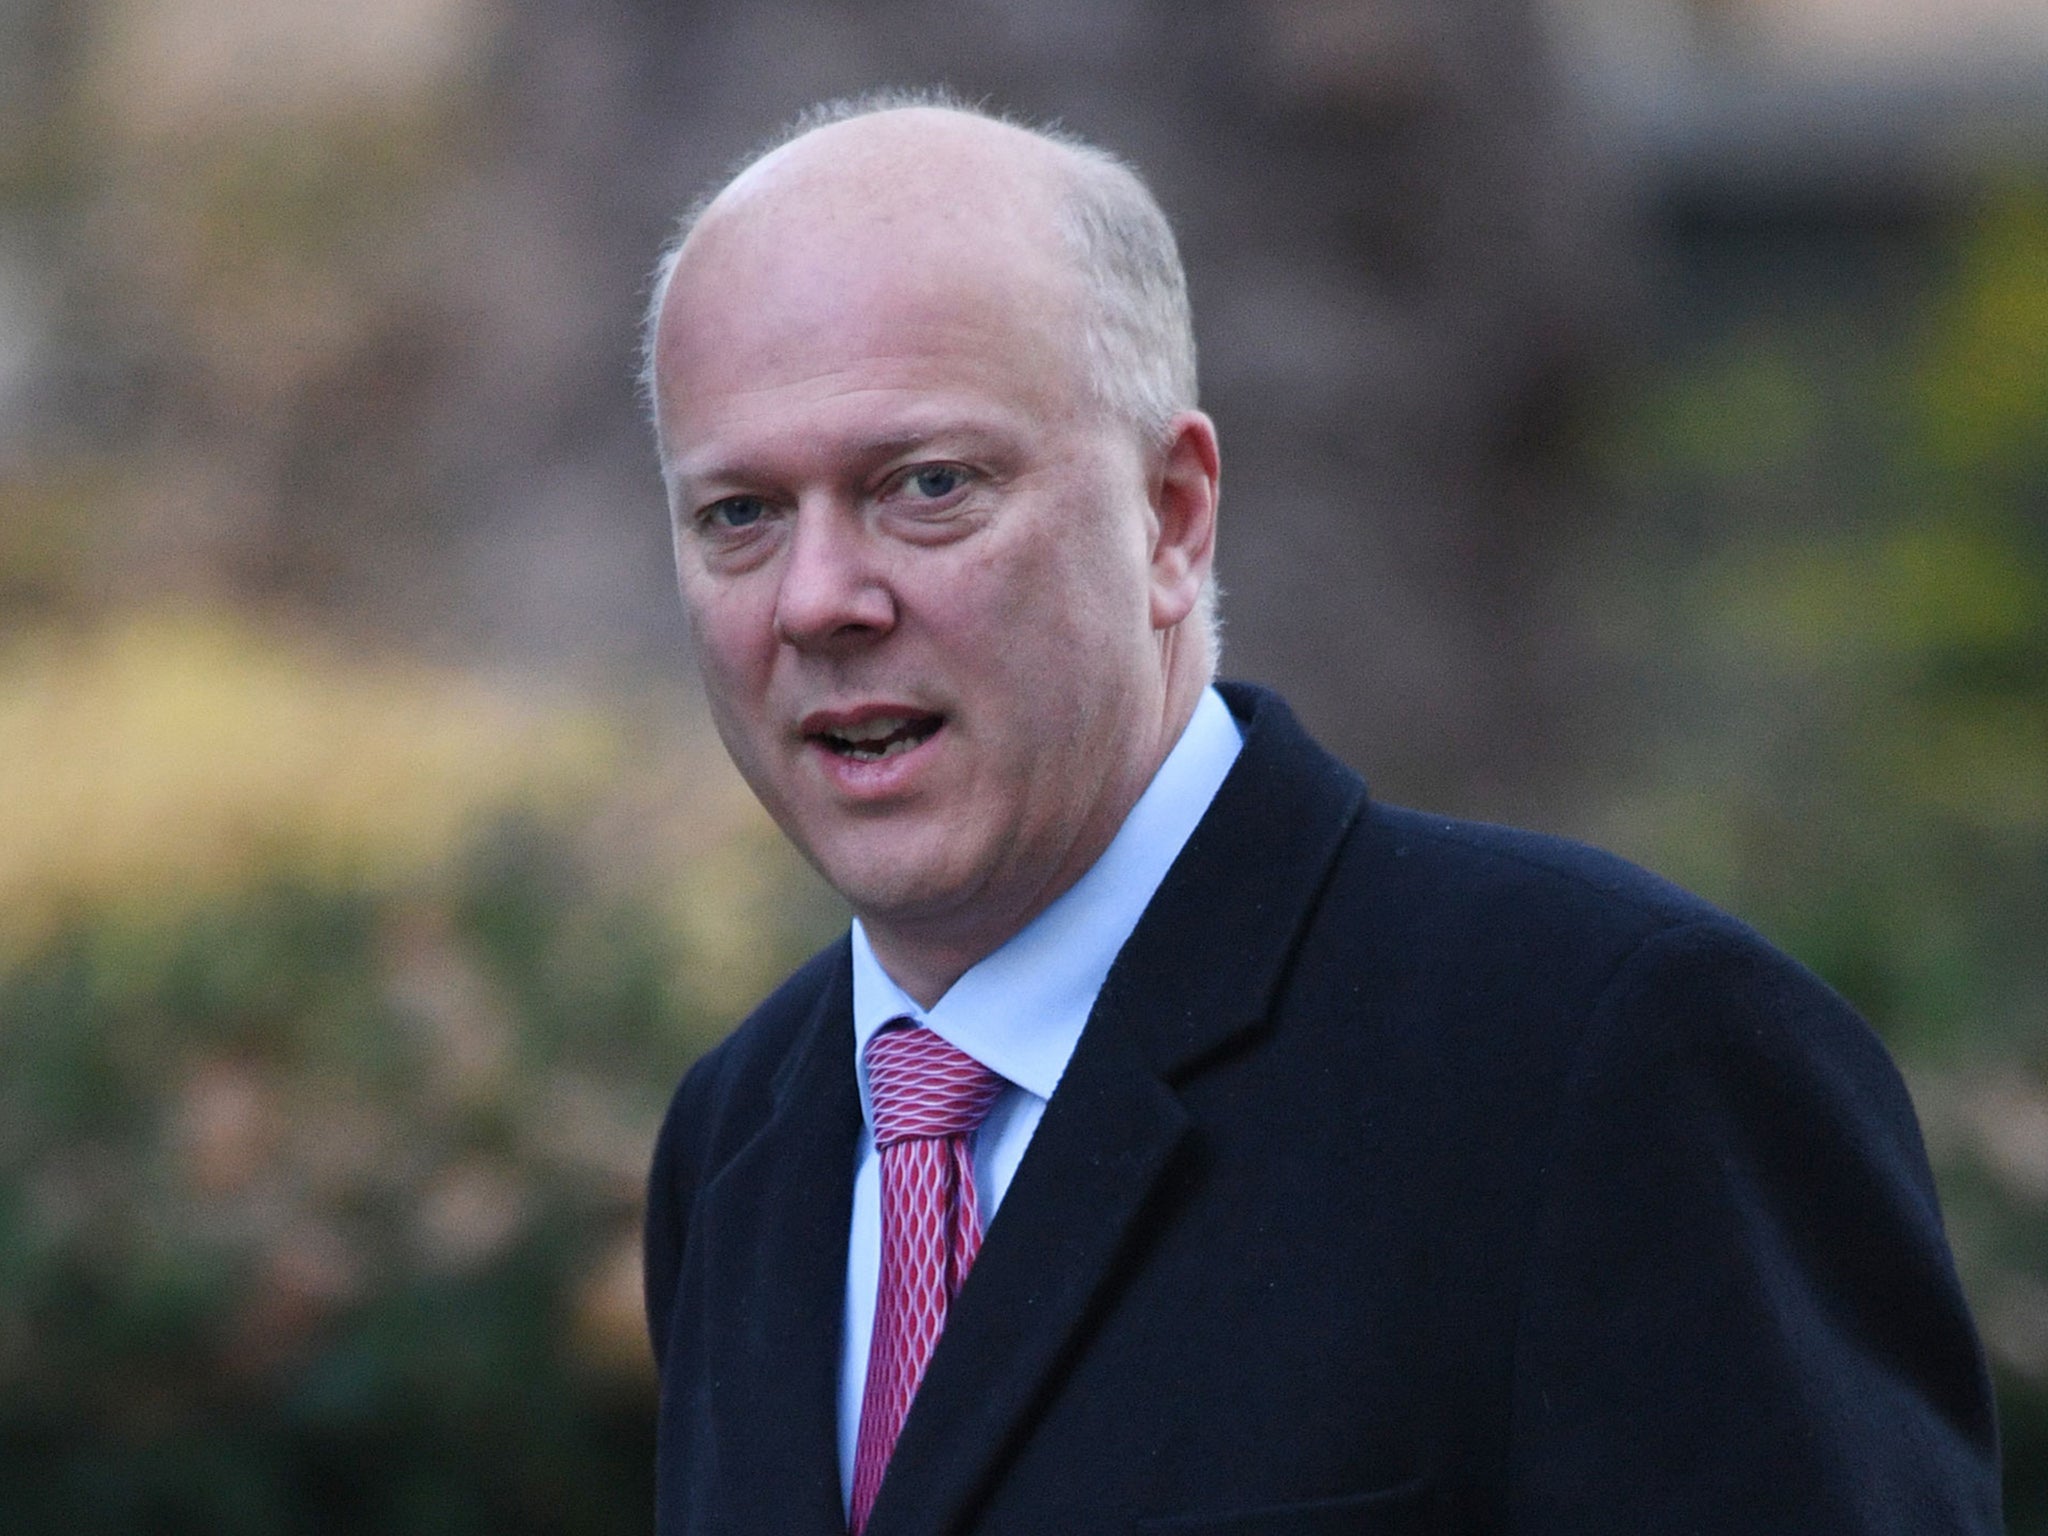 As justice secretary, Chris Grayling pushed through the reforms against widespread opposition